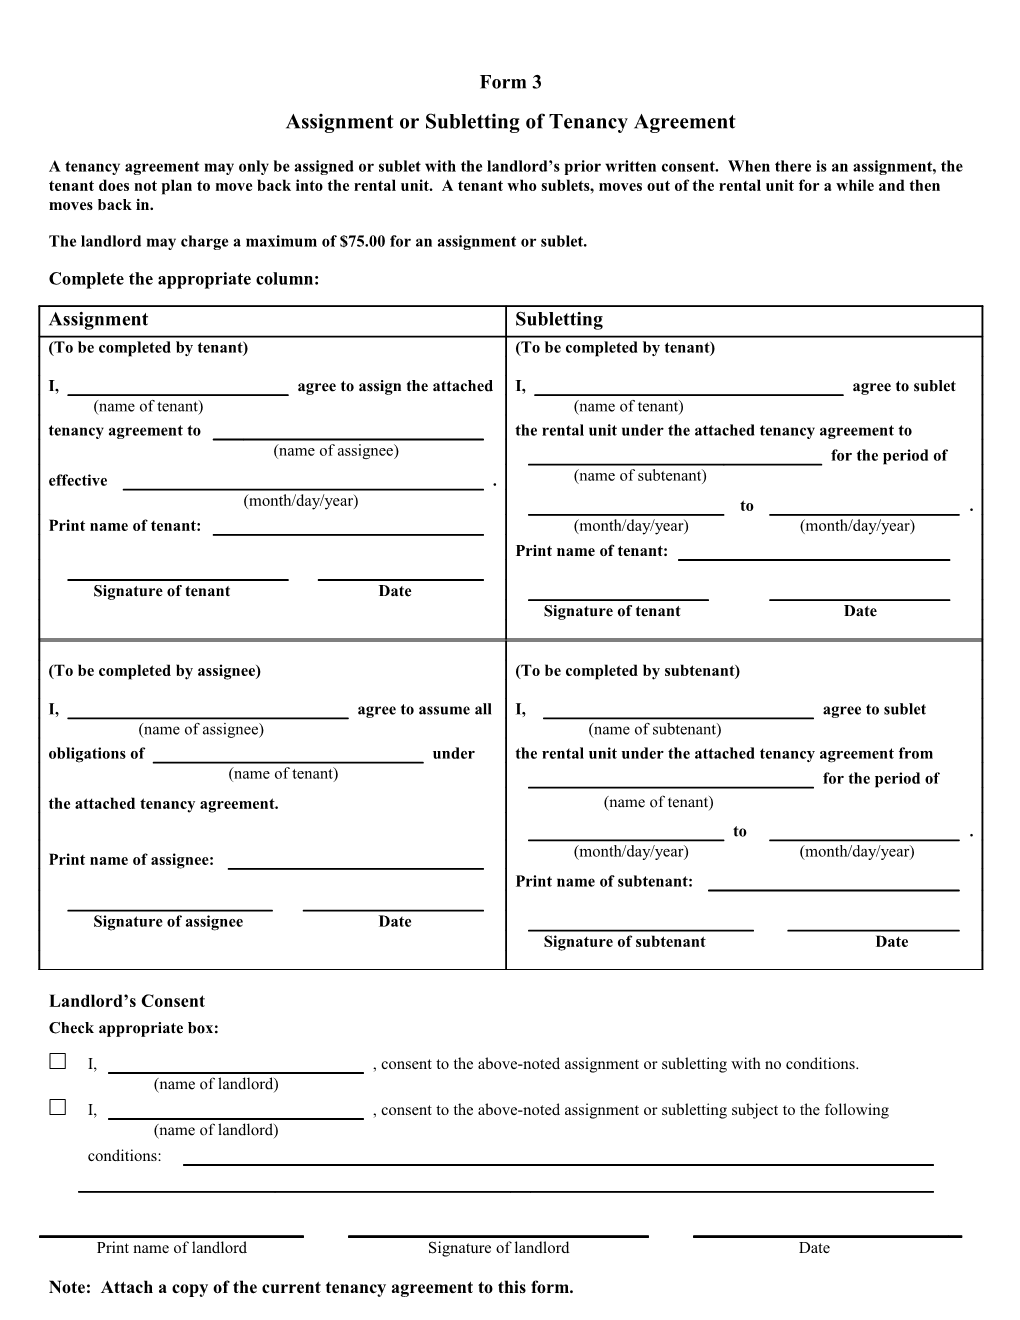 Assignment of Tenancy Agreement